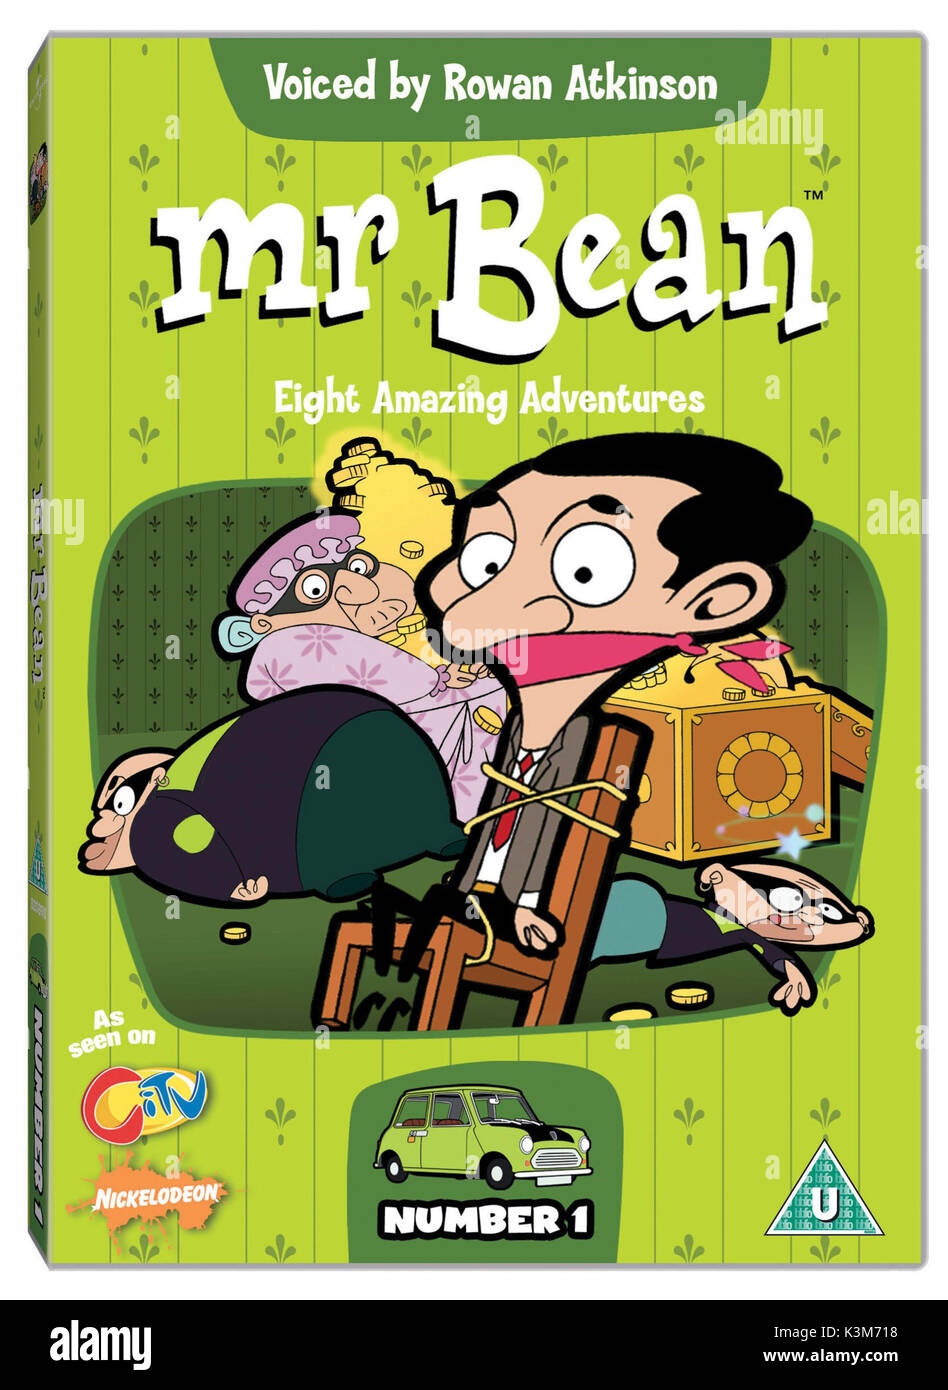 The Animated Series - Mr Bean Animated Head Transparent PNG - 343x362 -  Free Download on NicePNG